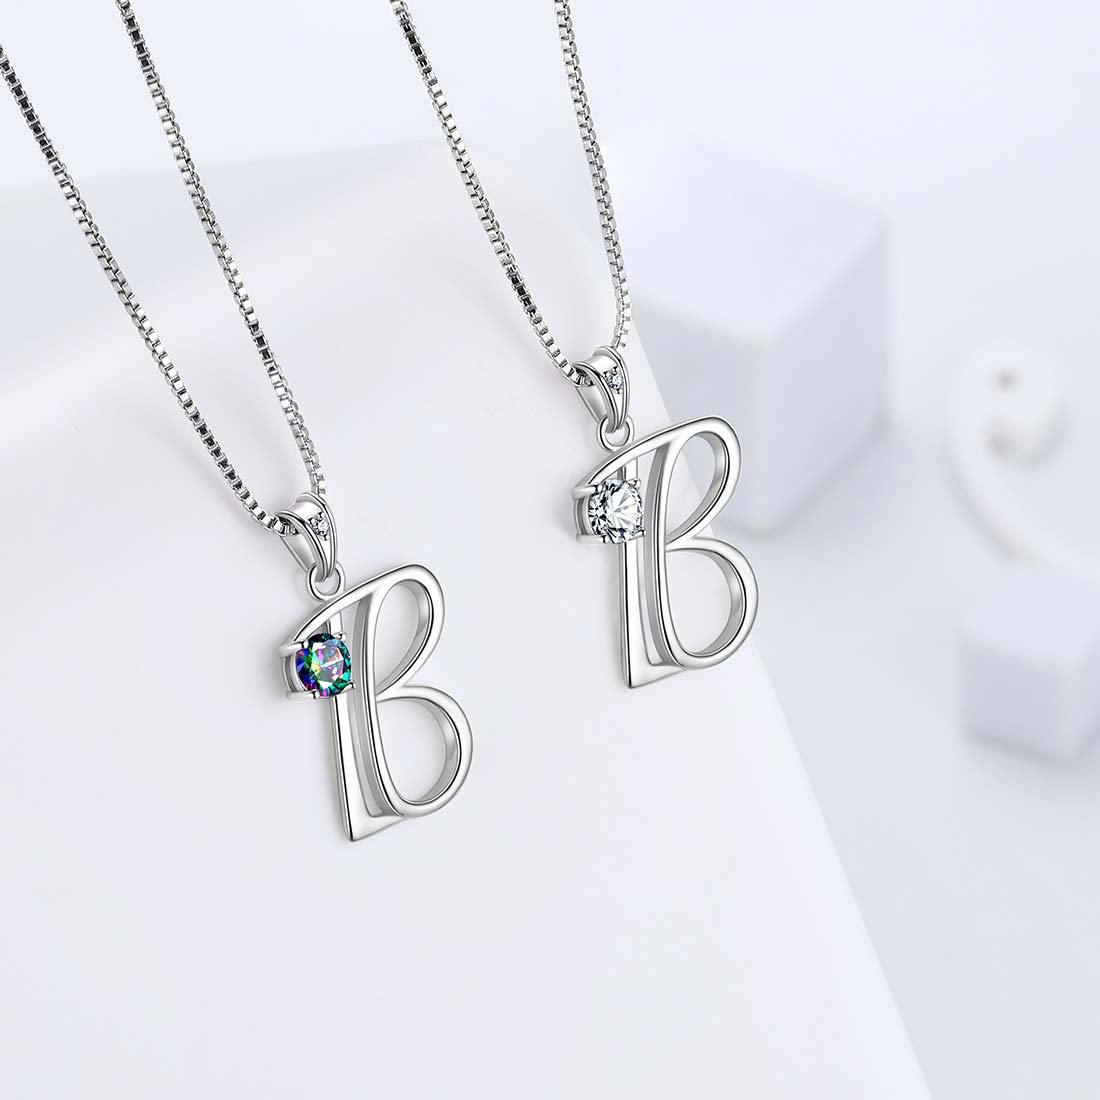 Women Letter B Initial Necklaces Sterling Silver Aurora Tears Jewelry